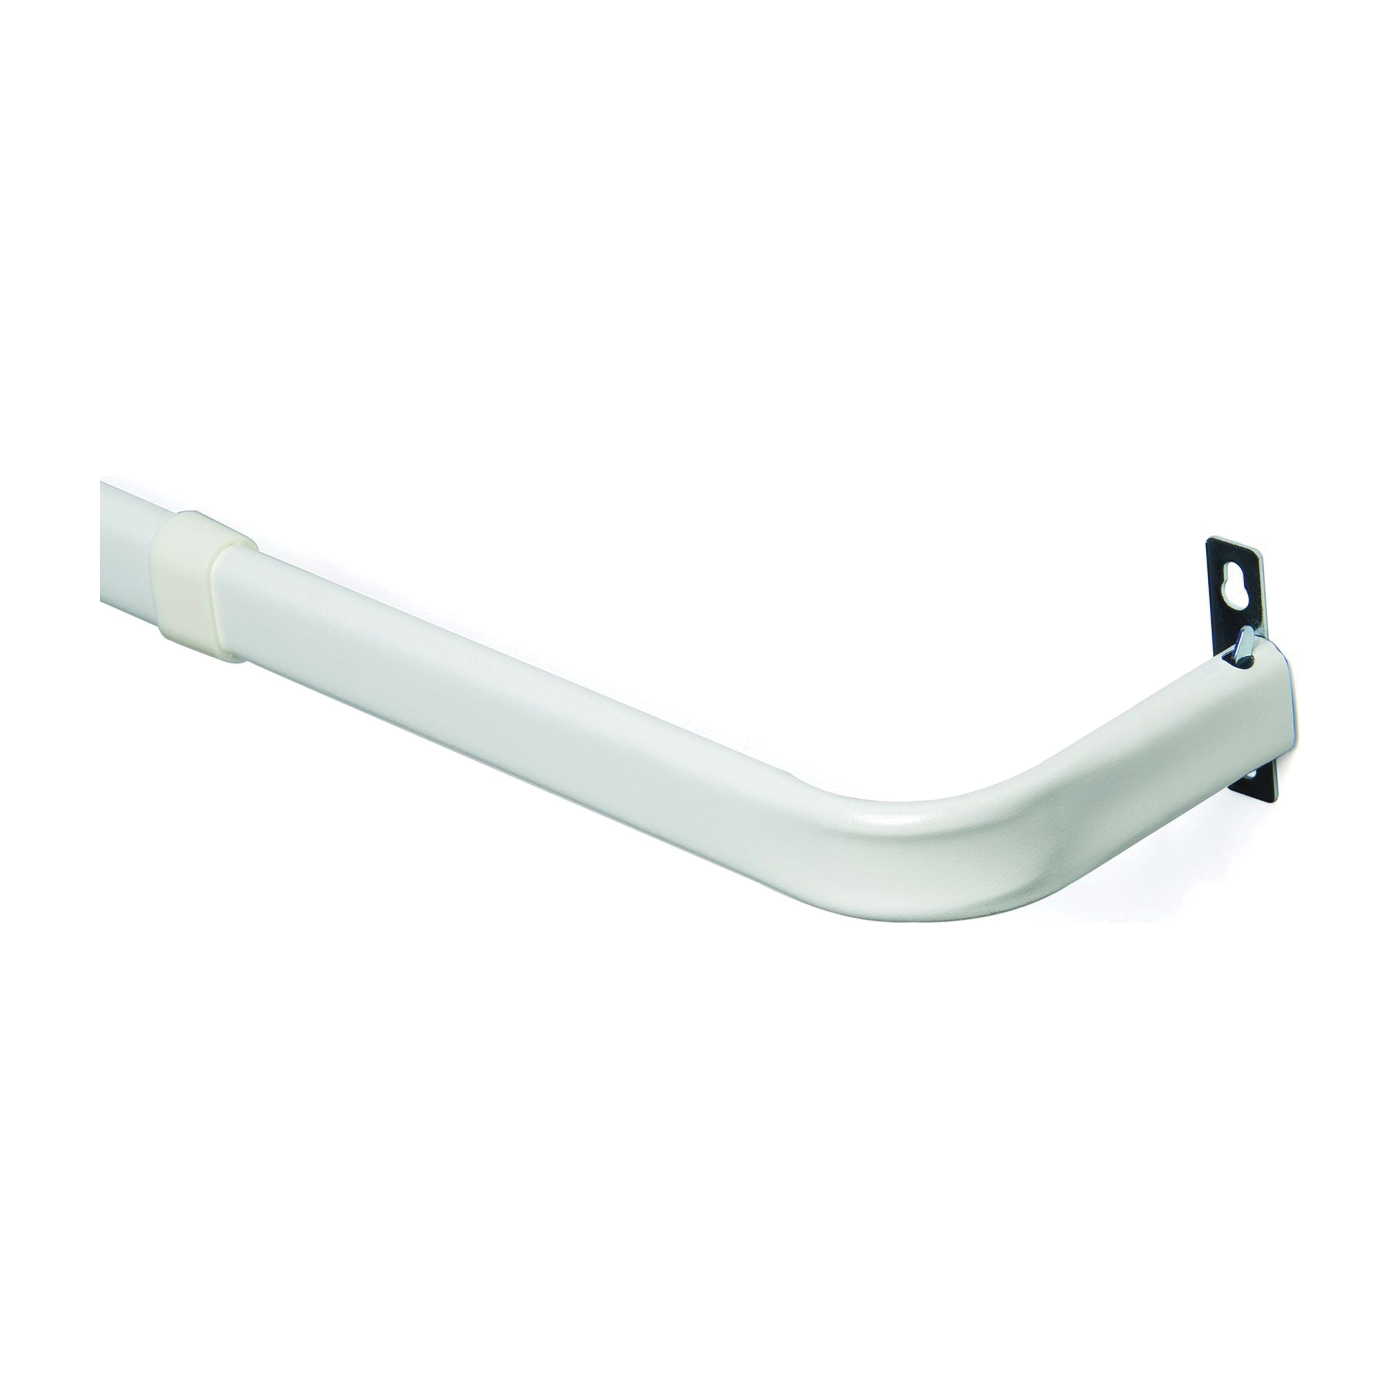 KN526 Curtain Rod, 1 in Dia, 28 to 48 in L, Steel, White